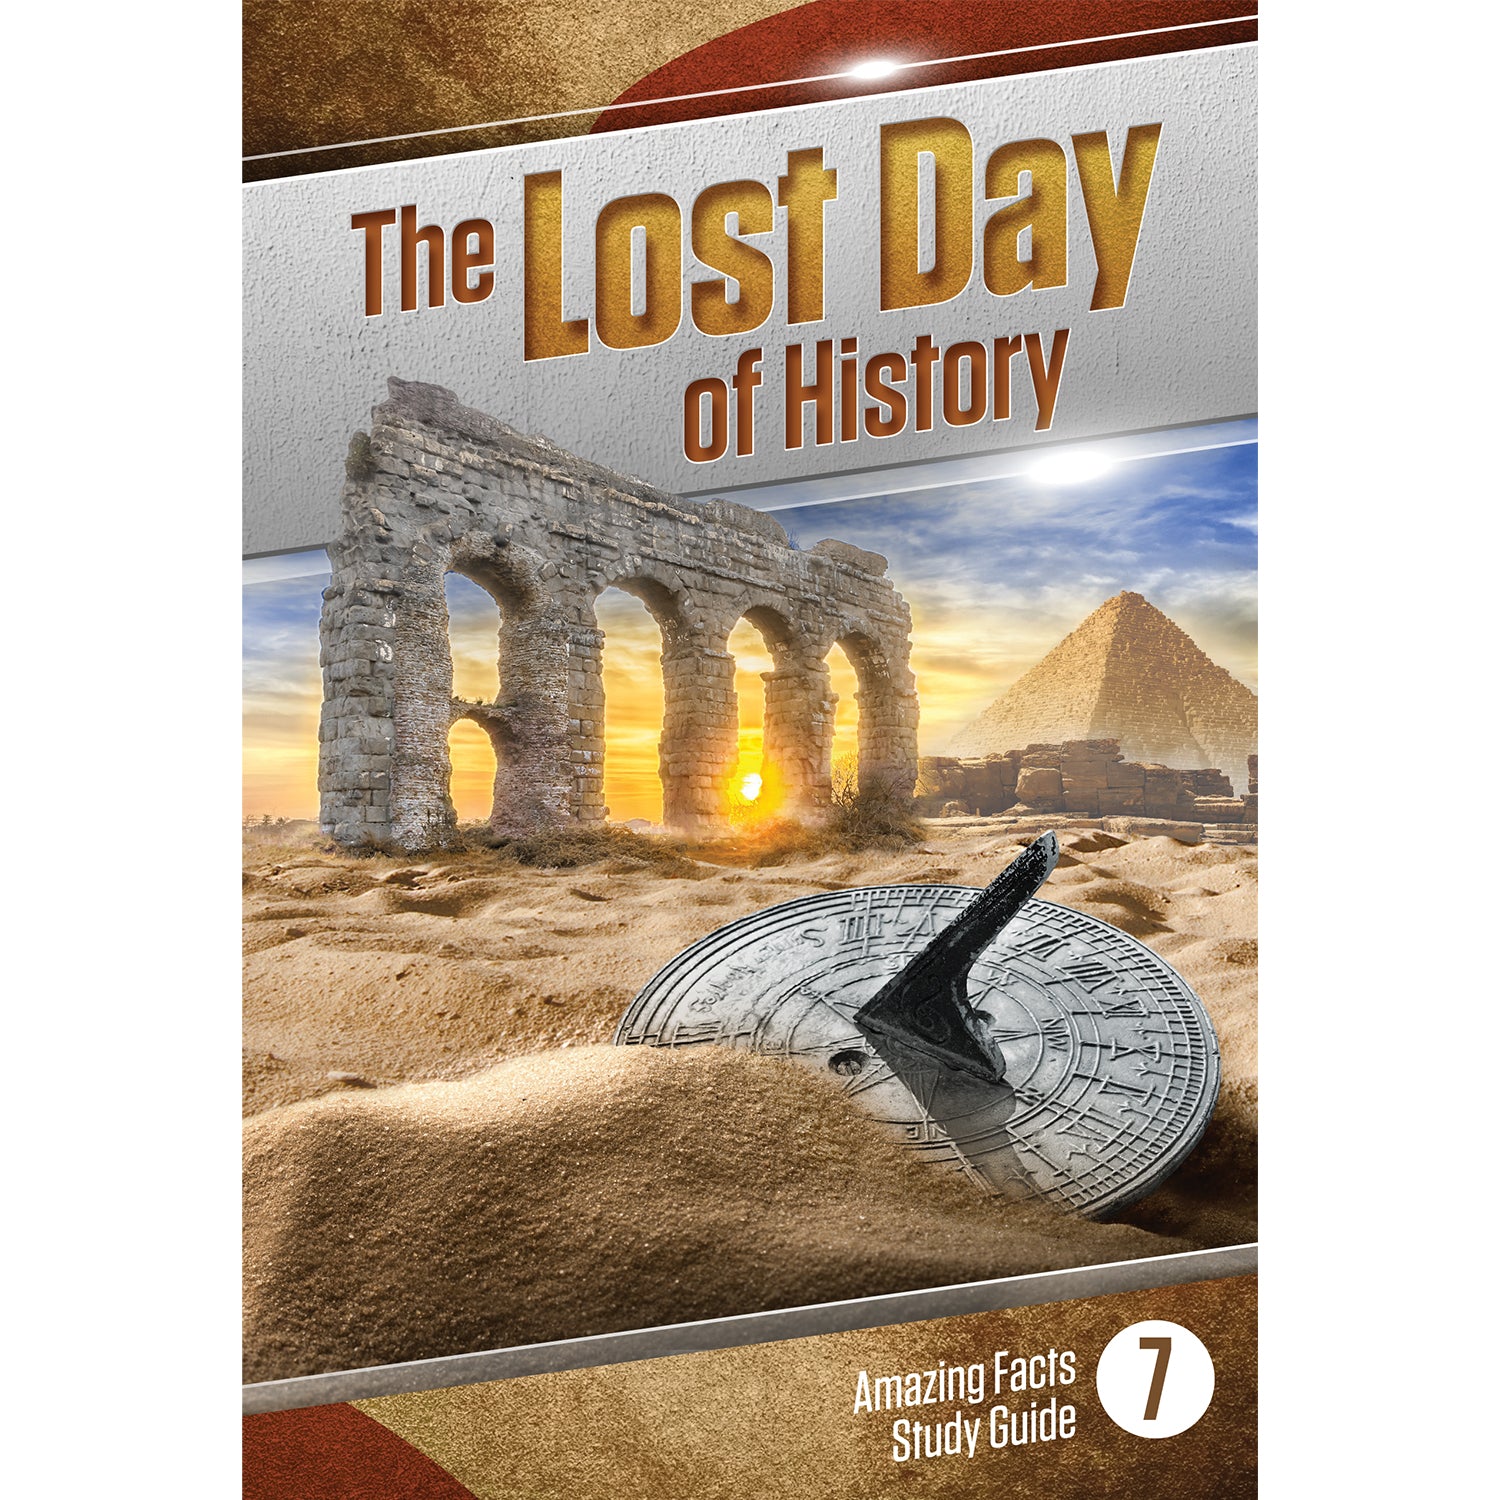 The Lost Day of History by Bill May